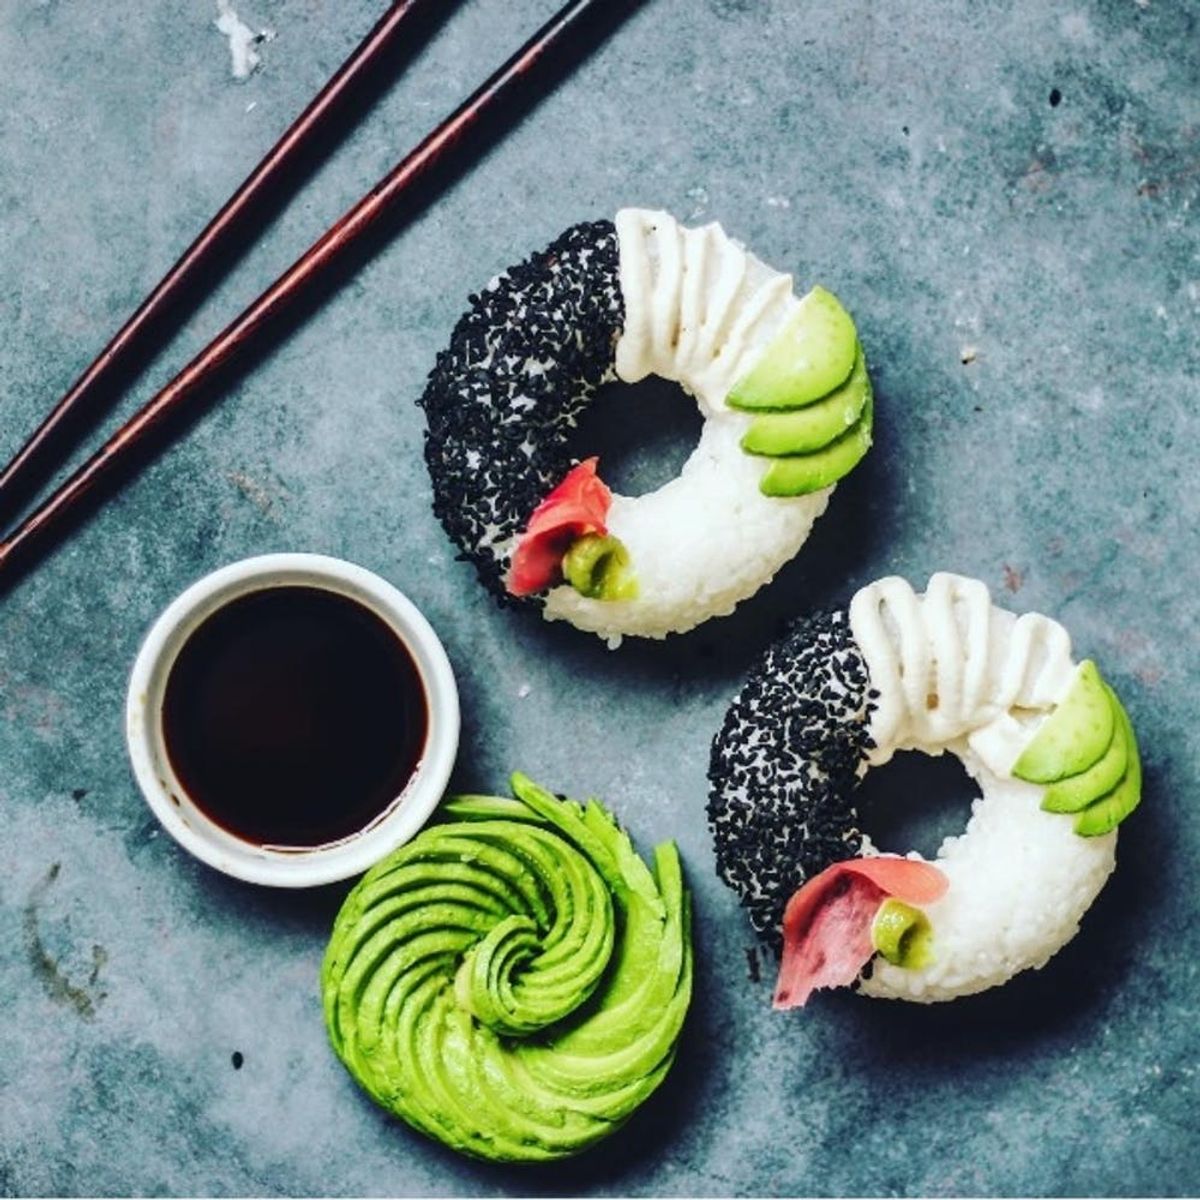 Sushi Donuts Are an Oddly Delicious Combination of Your 2 Favorite Things